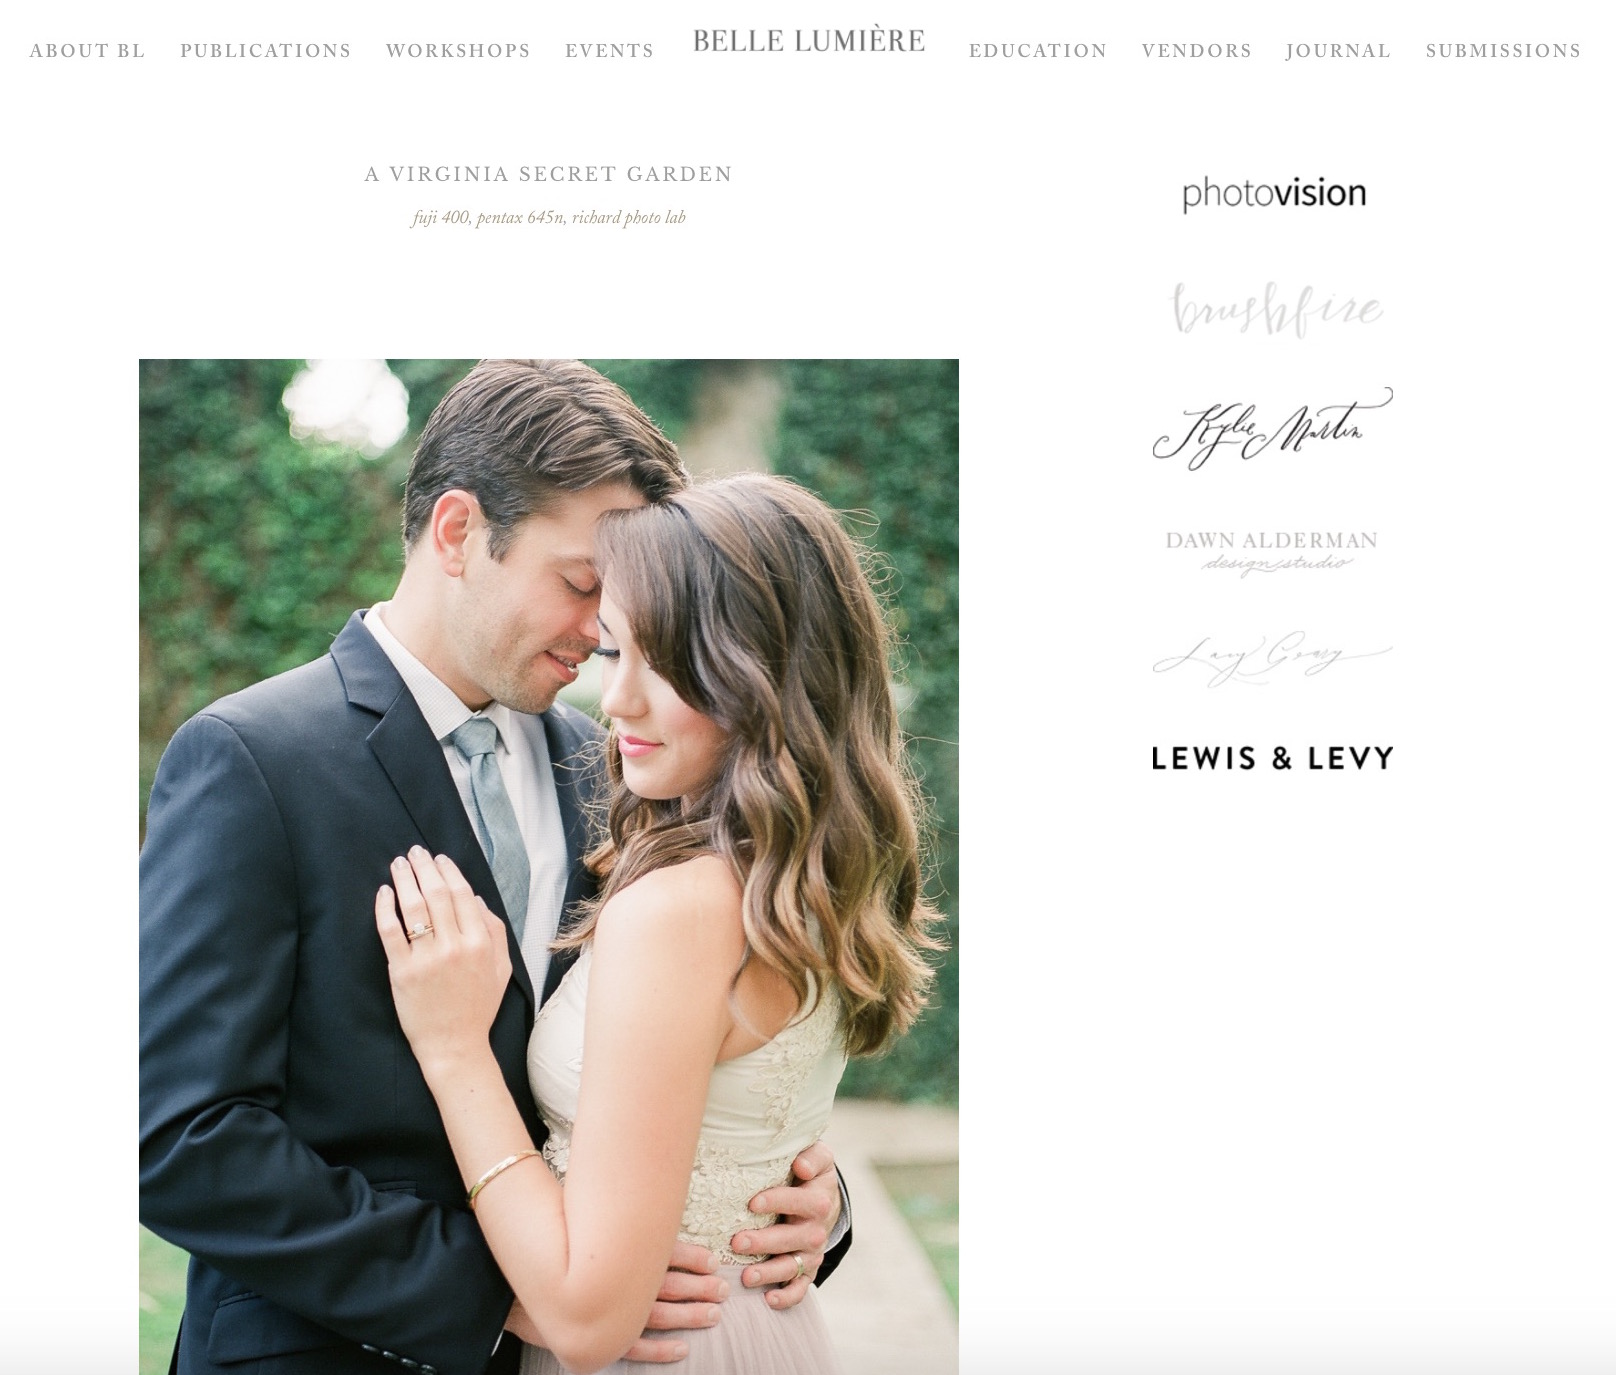 Belle Lumiere is featured this stunning session by Washington, DC anniversary photographer, Alicia Lacey, at the stunning Goodstone Inn in Middleburg, VA.